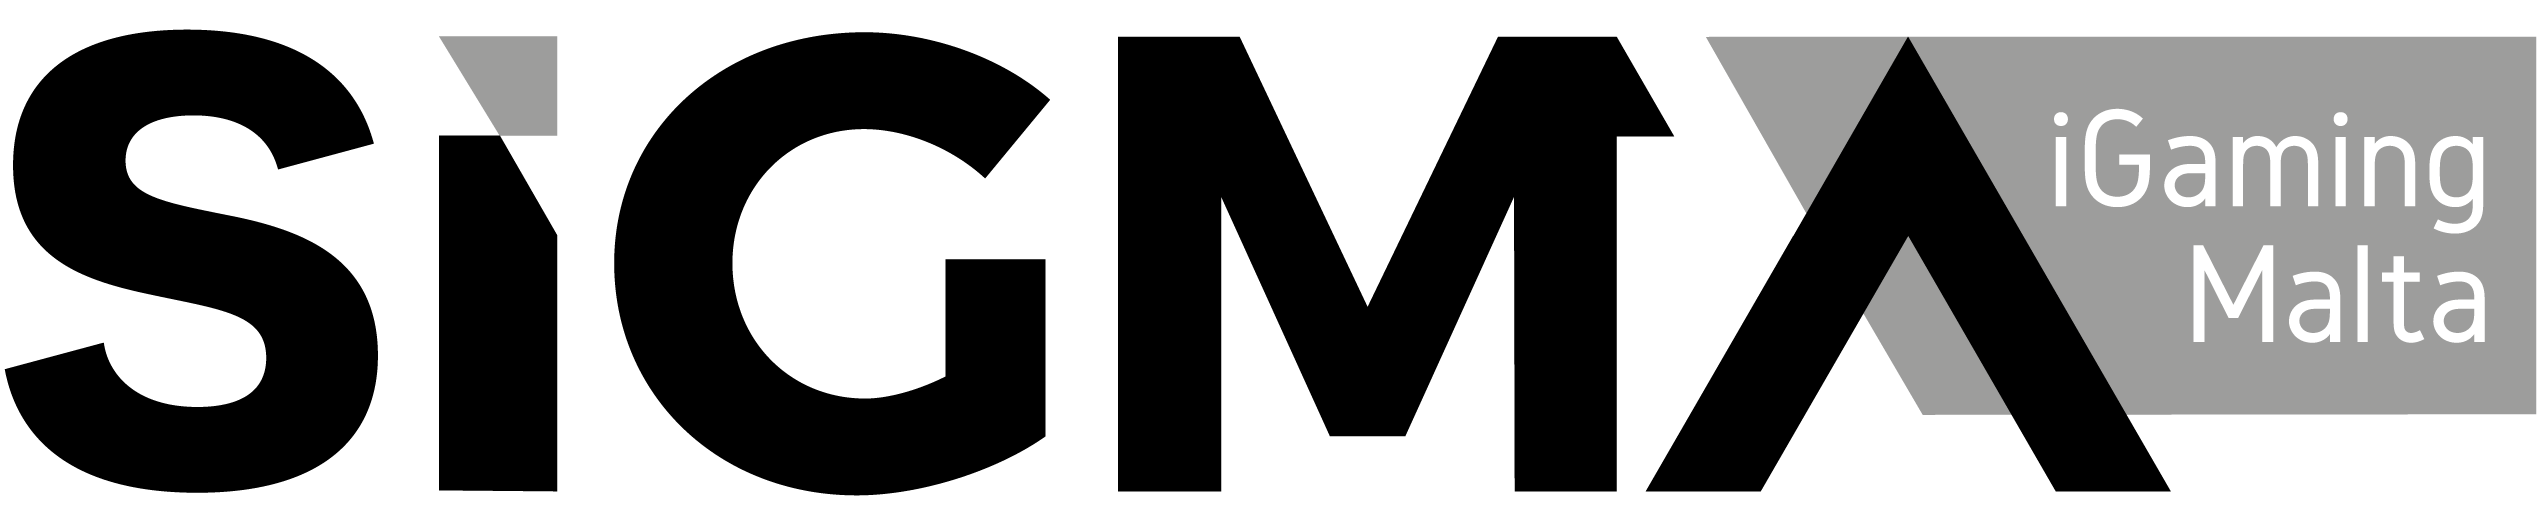 Sigma Logo - Press Pack - iGaming Malta - Online Gaming Events | SiGMA